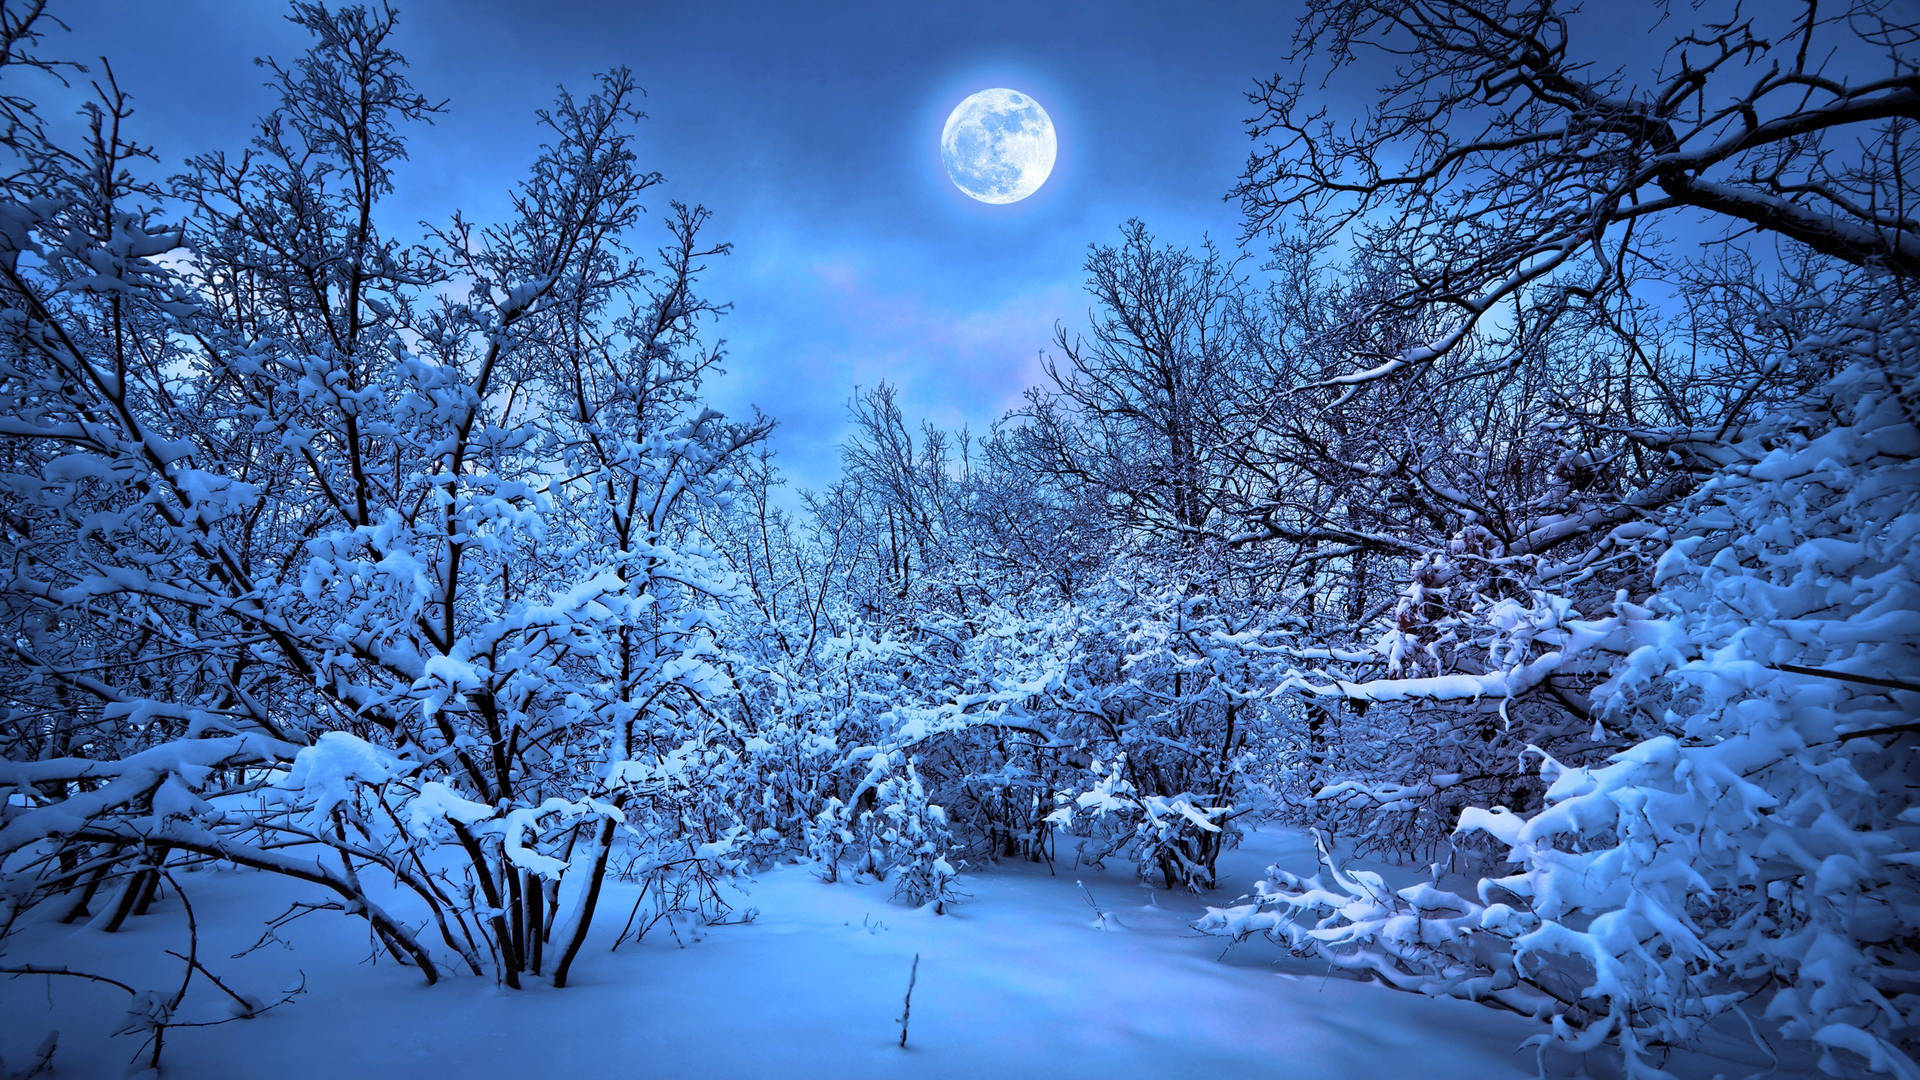 Snow Covered Trees Winter Wallpaper